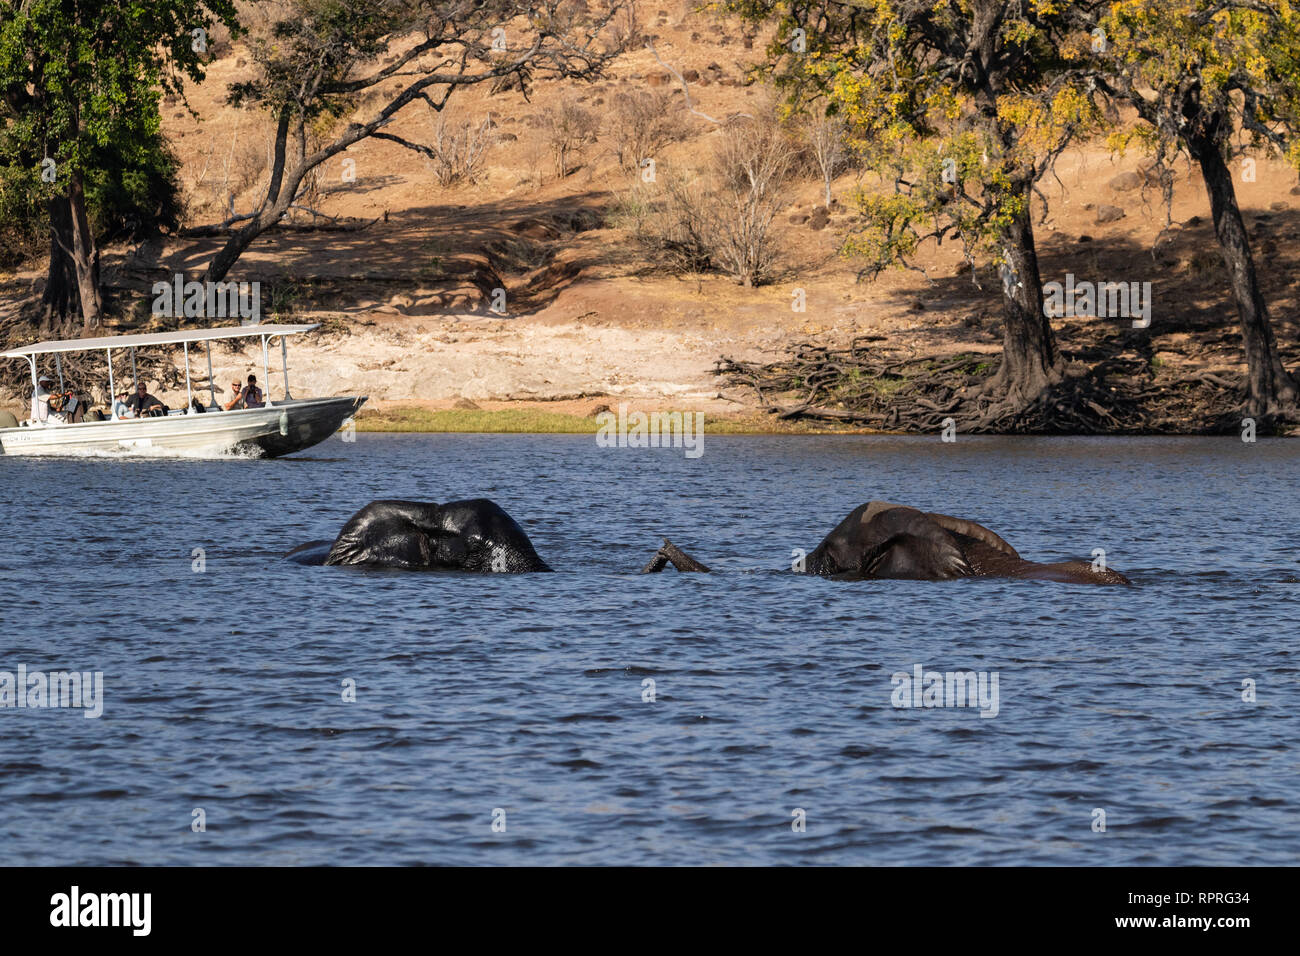 Two male elephants play fighting and swimming in the river, while a tourist boat goes past in the background Chobe National Park, Kasane, Botswana Stock Photo